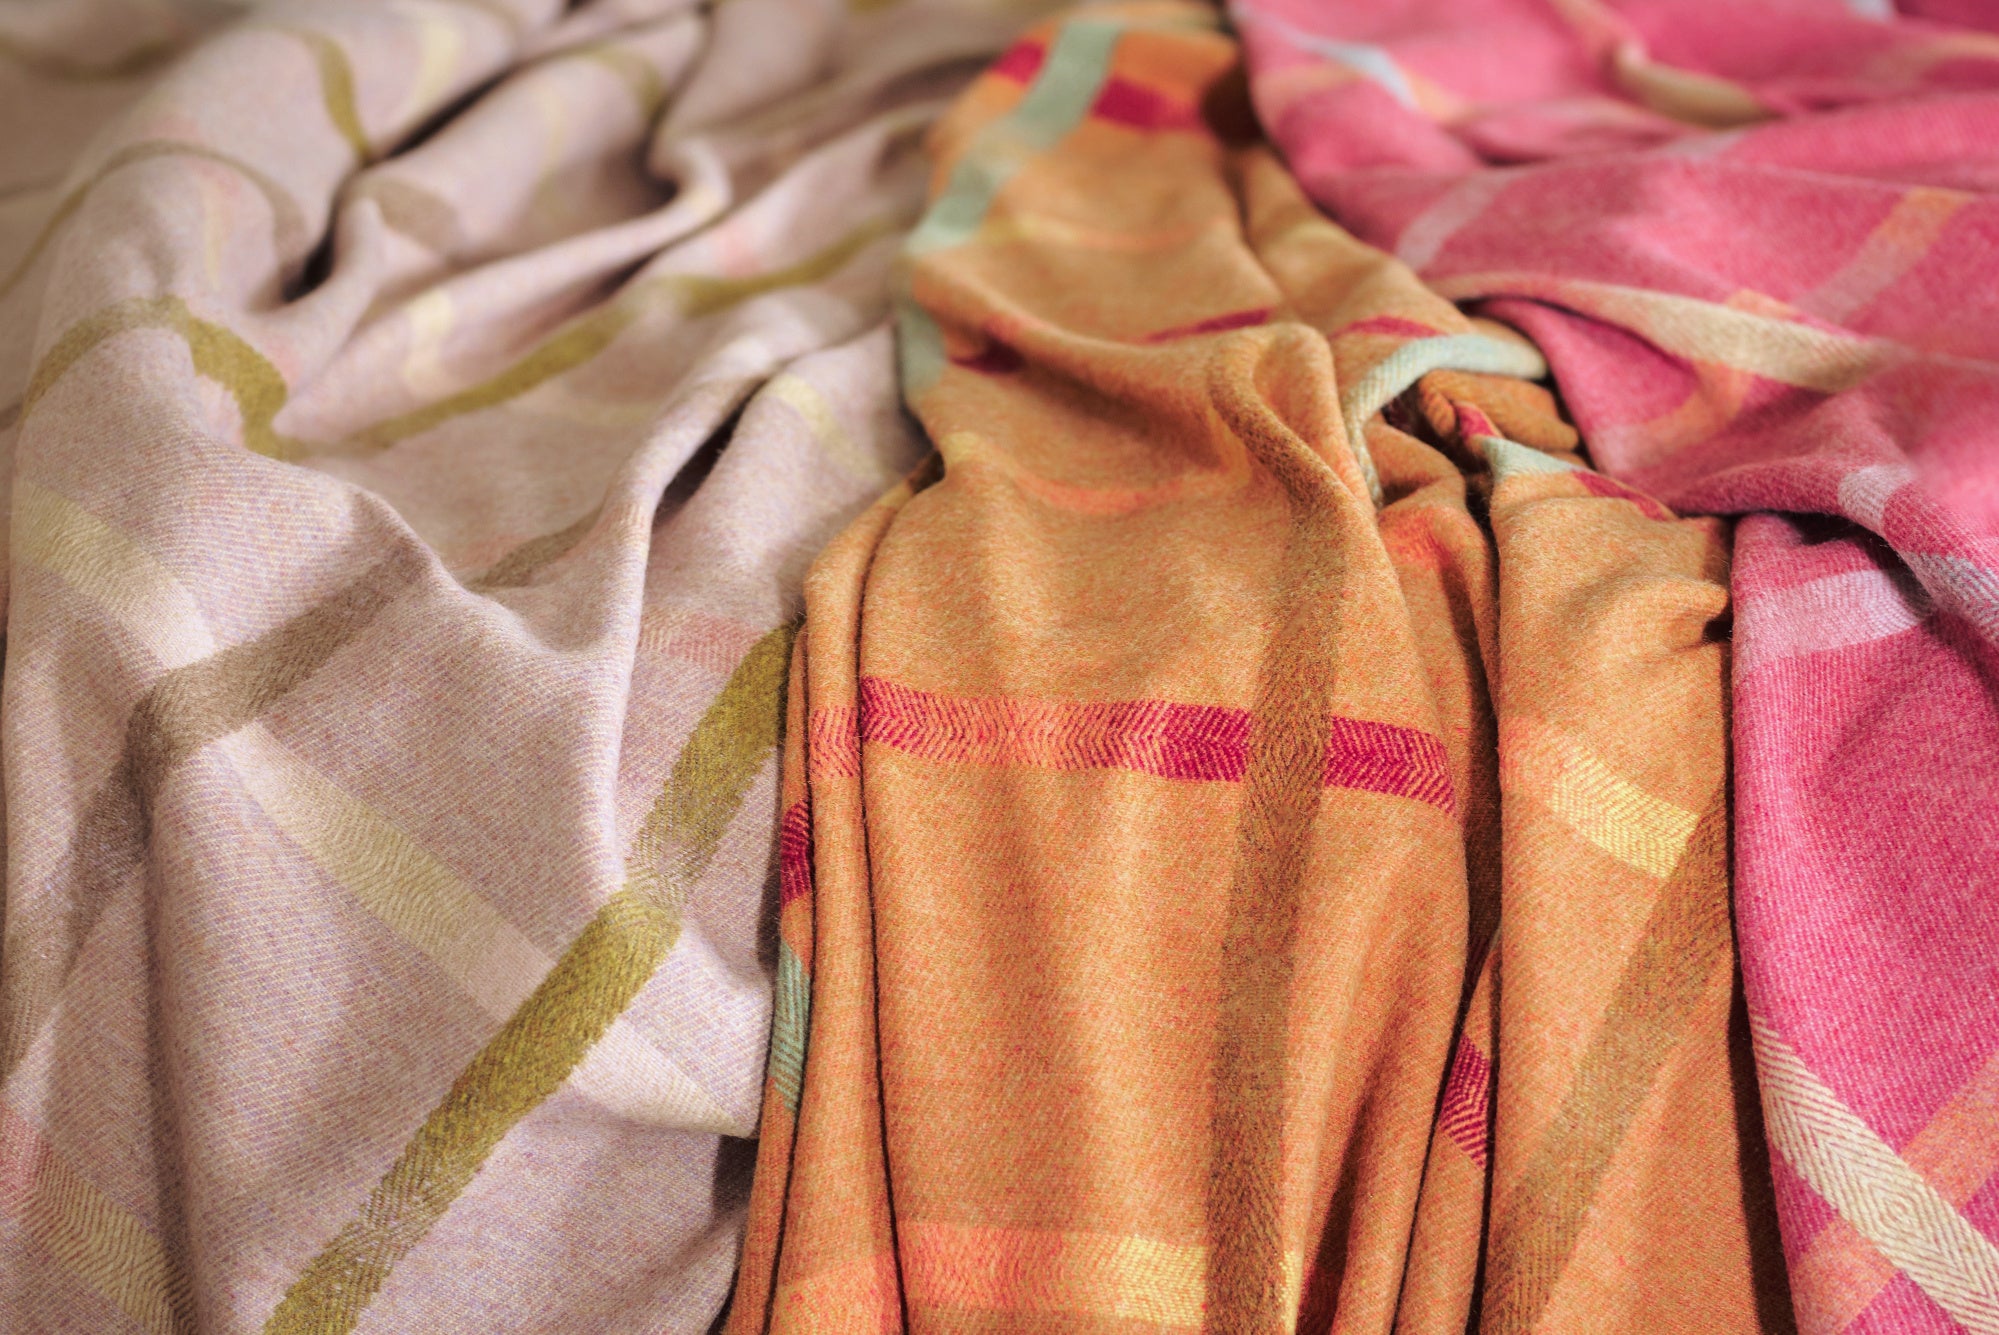 Pink and Orange Merino Wool Blanket Collection Inspired by British Garden Flowers by The British Blanket Company online shop